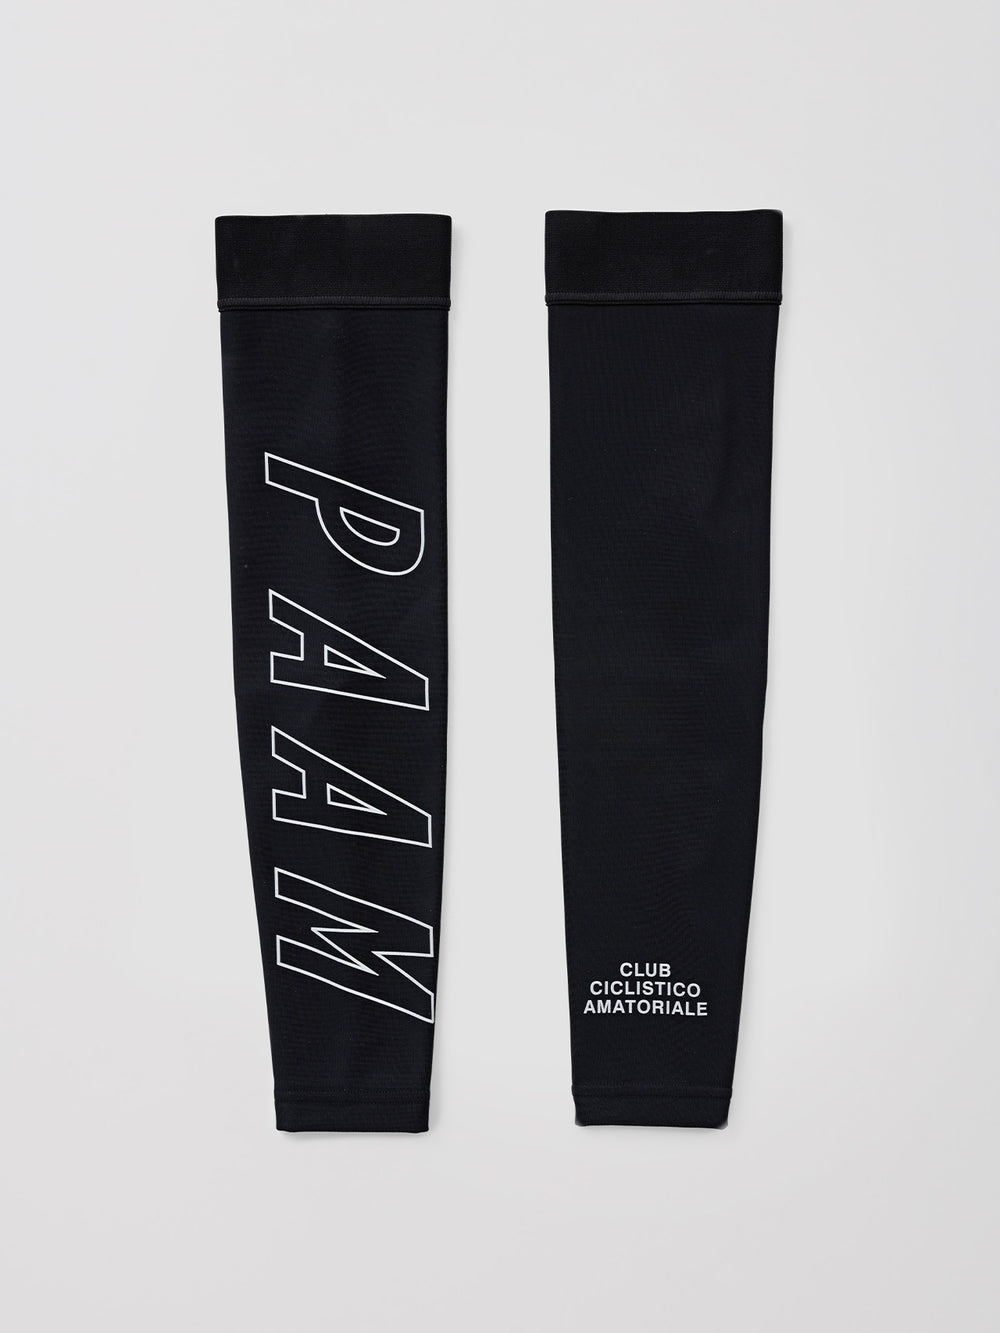 Product Image for MAAP x PAM Arm Warmers